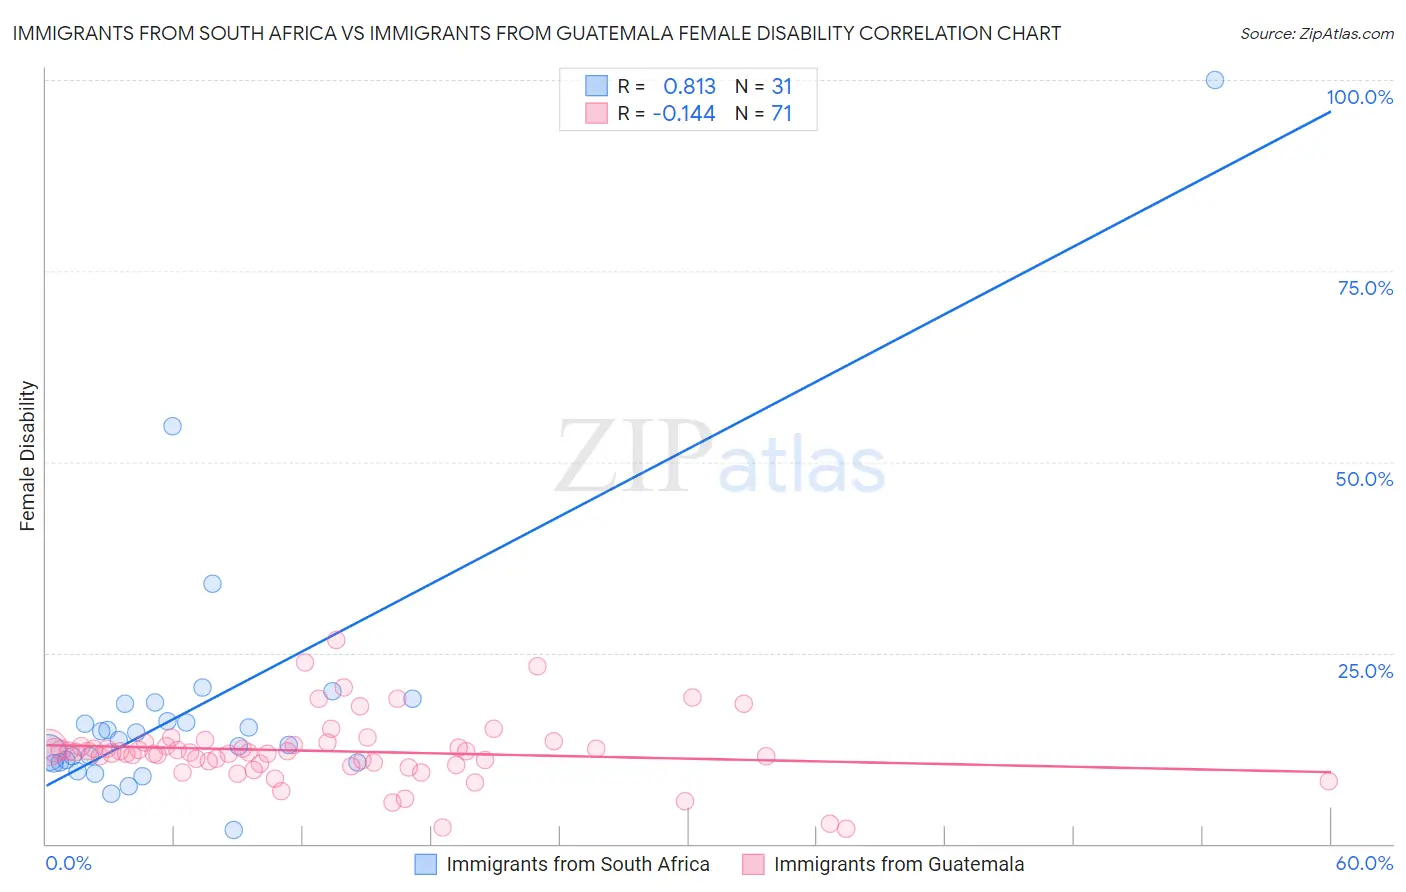 Immigrants from South Africa vs Immigrants from Guatemala Female Disability